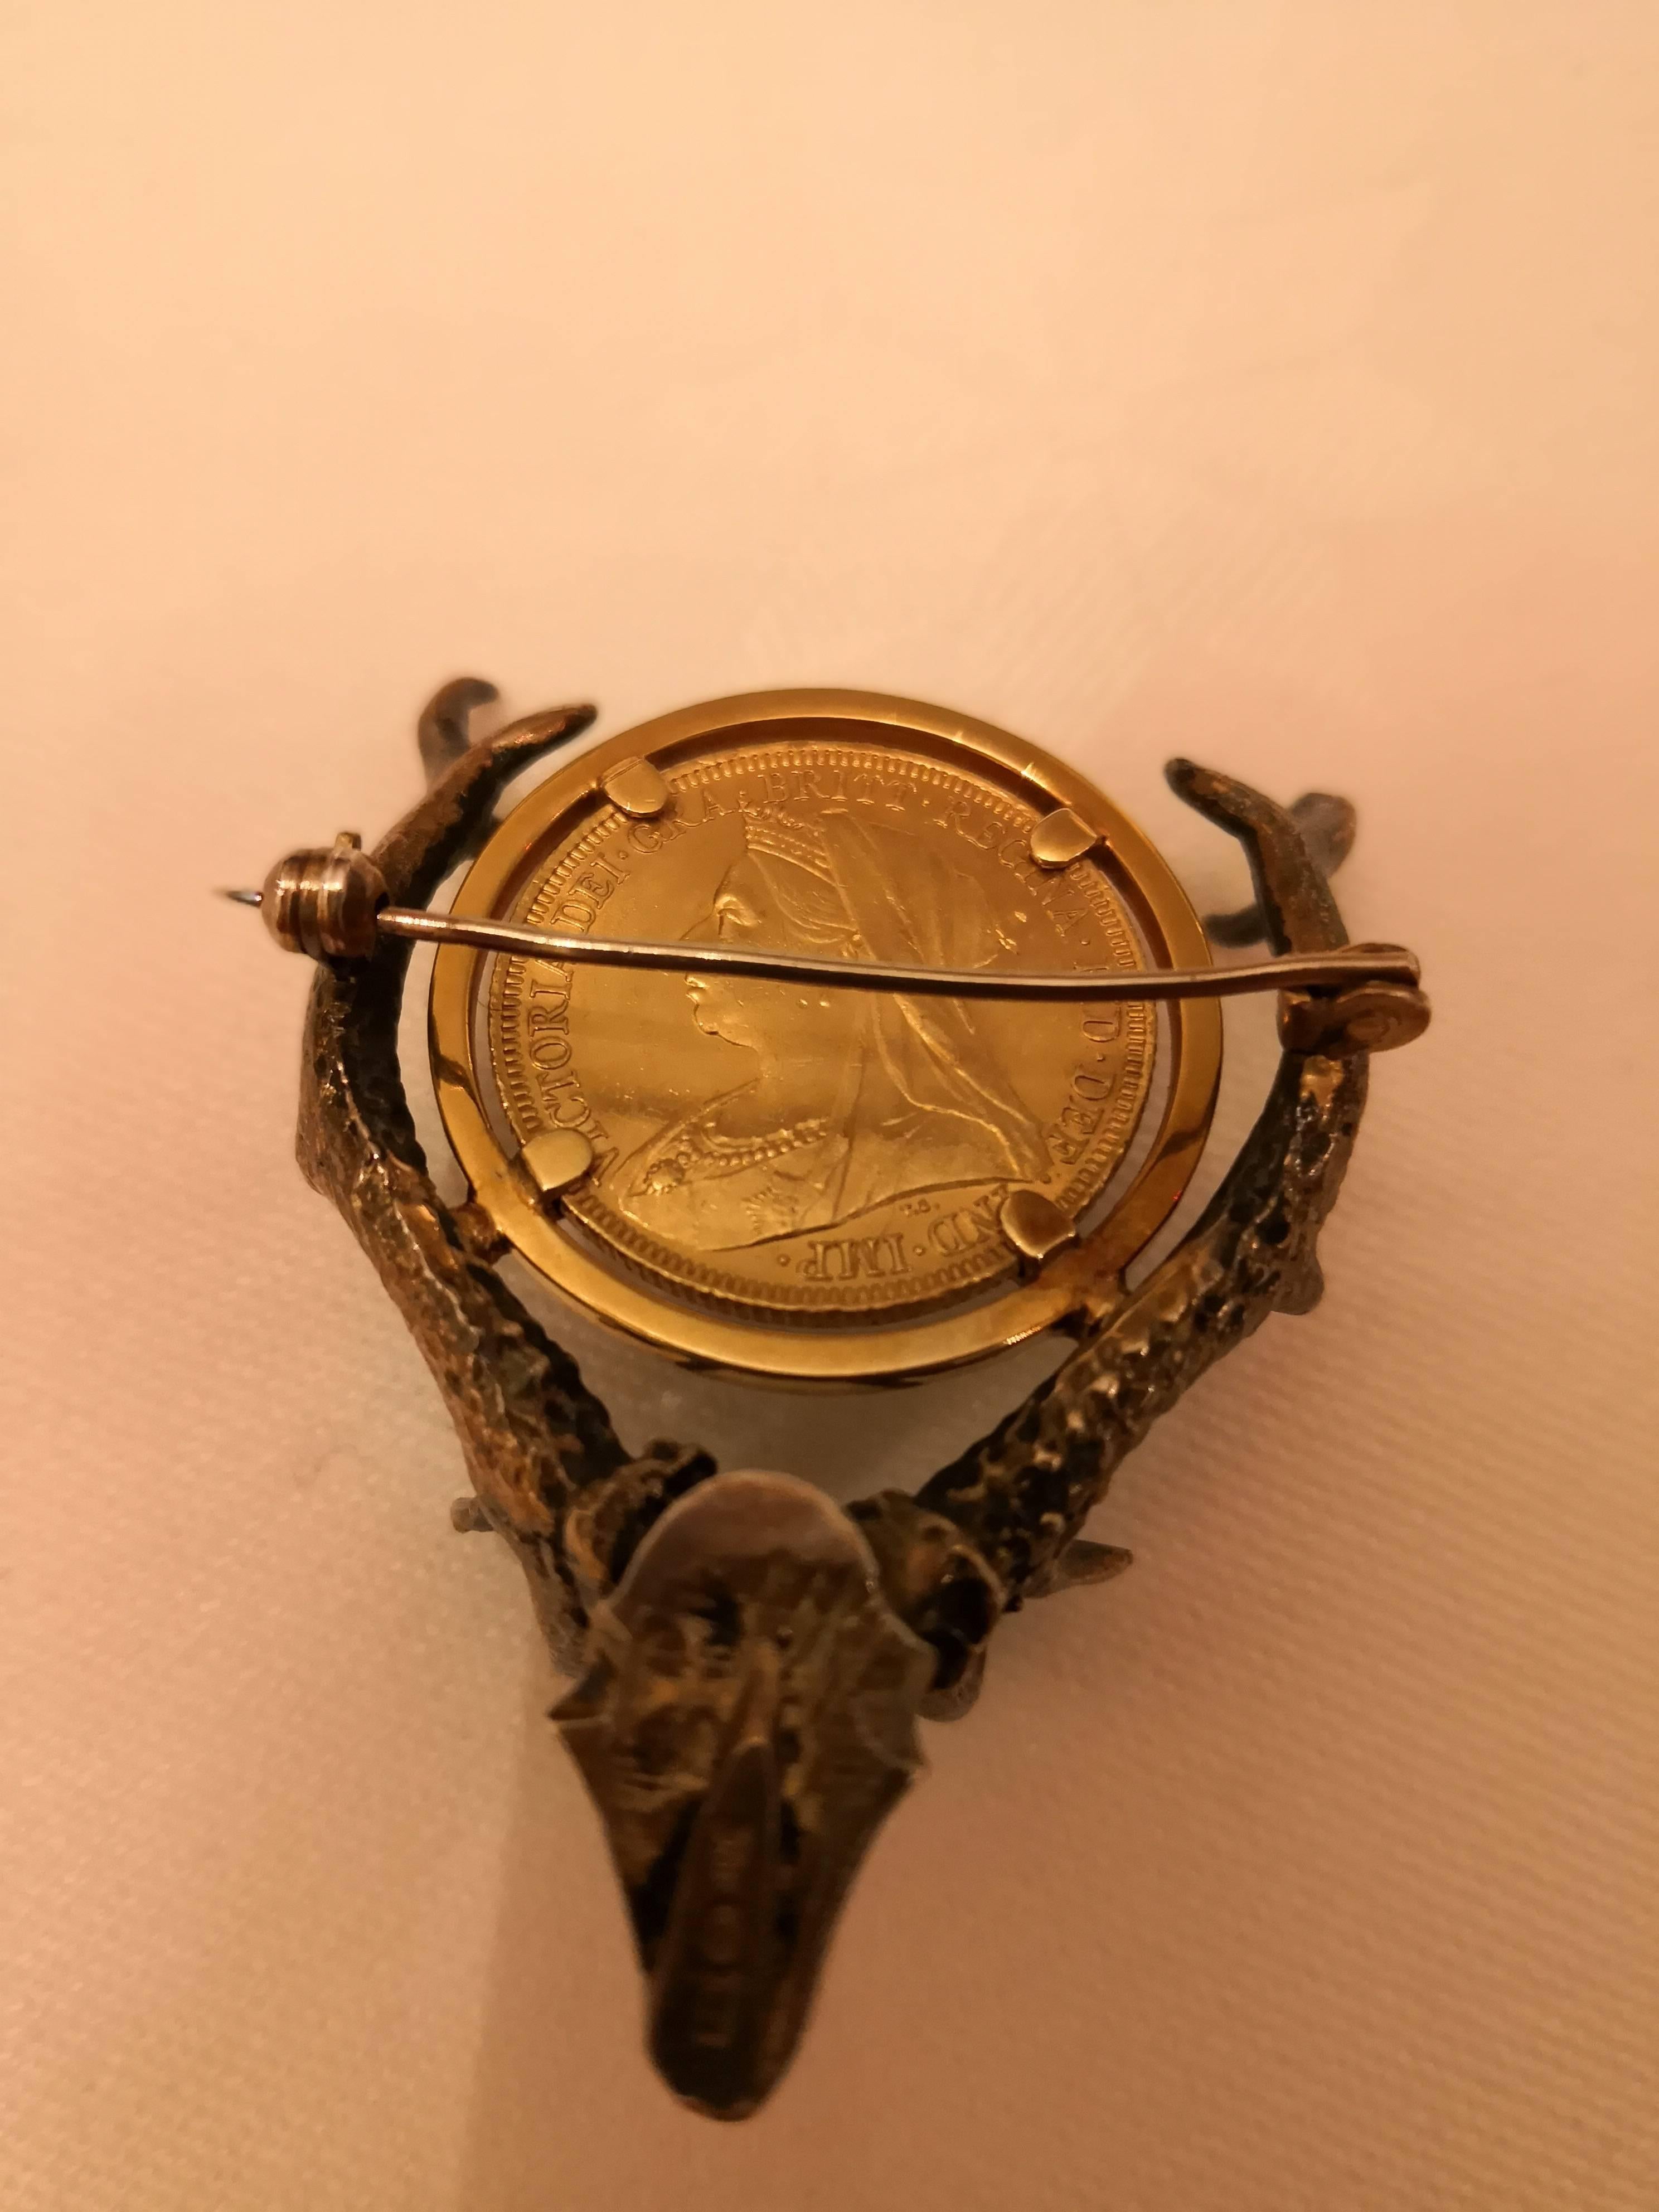 Handmade brooch in the form of an antler in silver gilded. In the middle a Victorian gold medal dated 1895. Austrian hallmark and silver hallmark.